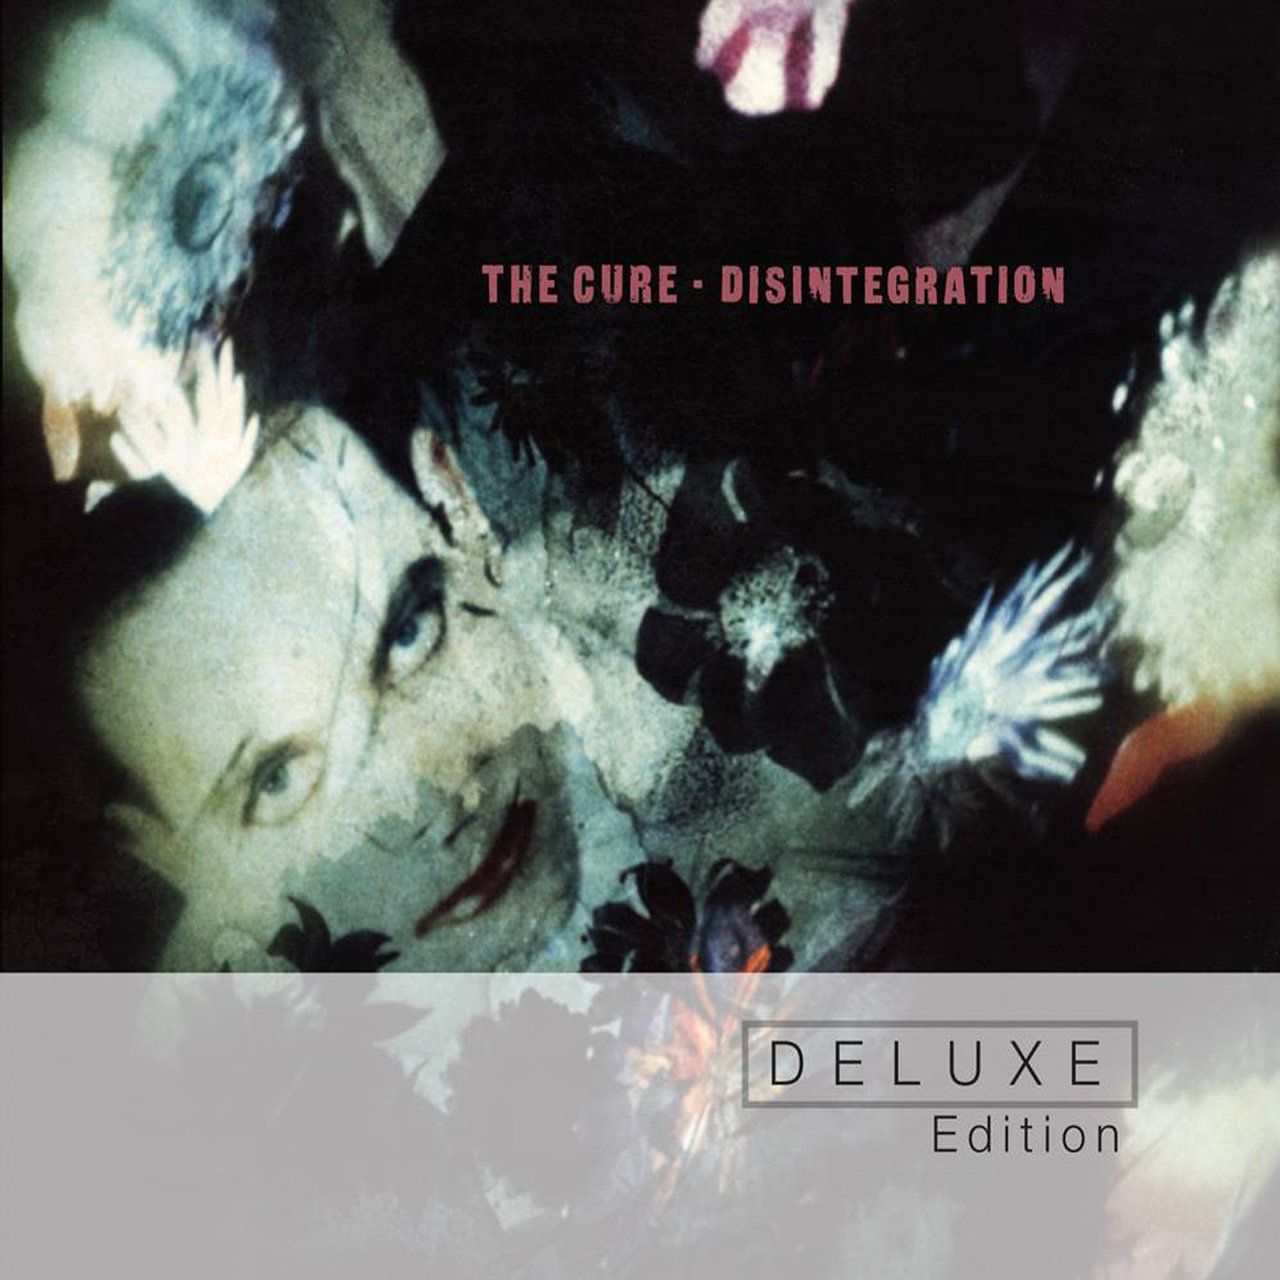 The Cure - Disintegration (Deluxe Edition) [1989] cd1-3 NZBonly